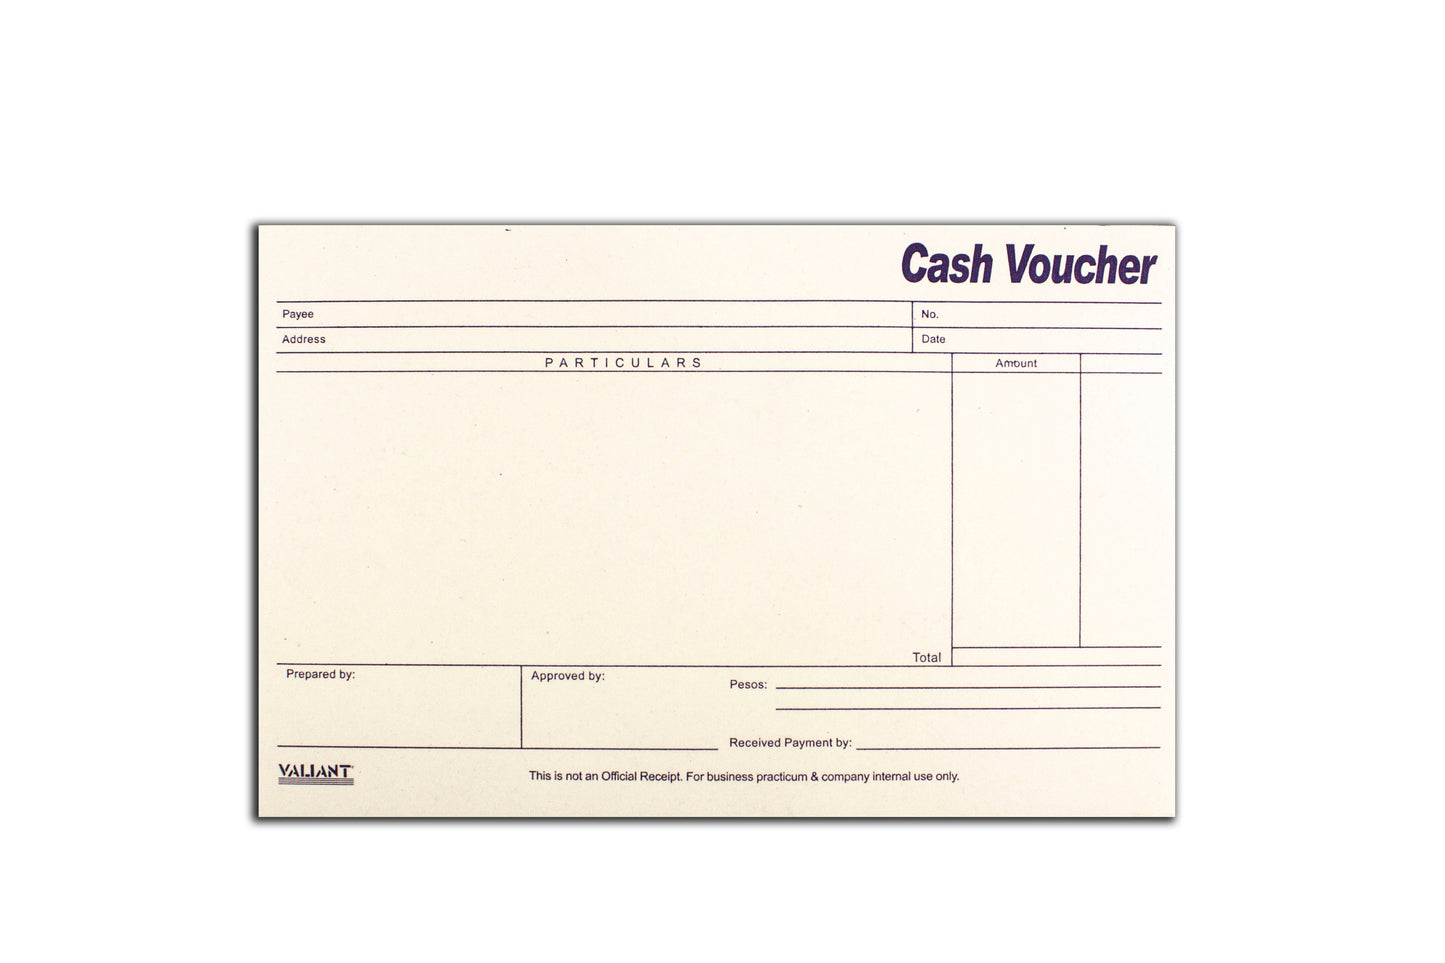 Cash Voucher 1ply 5.5in x 8.5in 10Pads